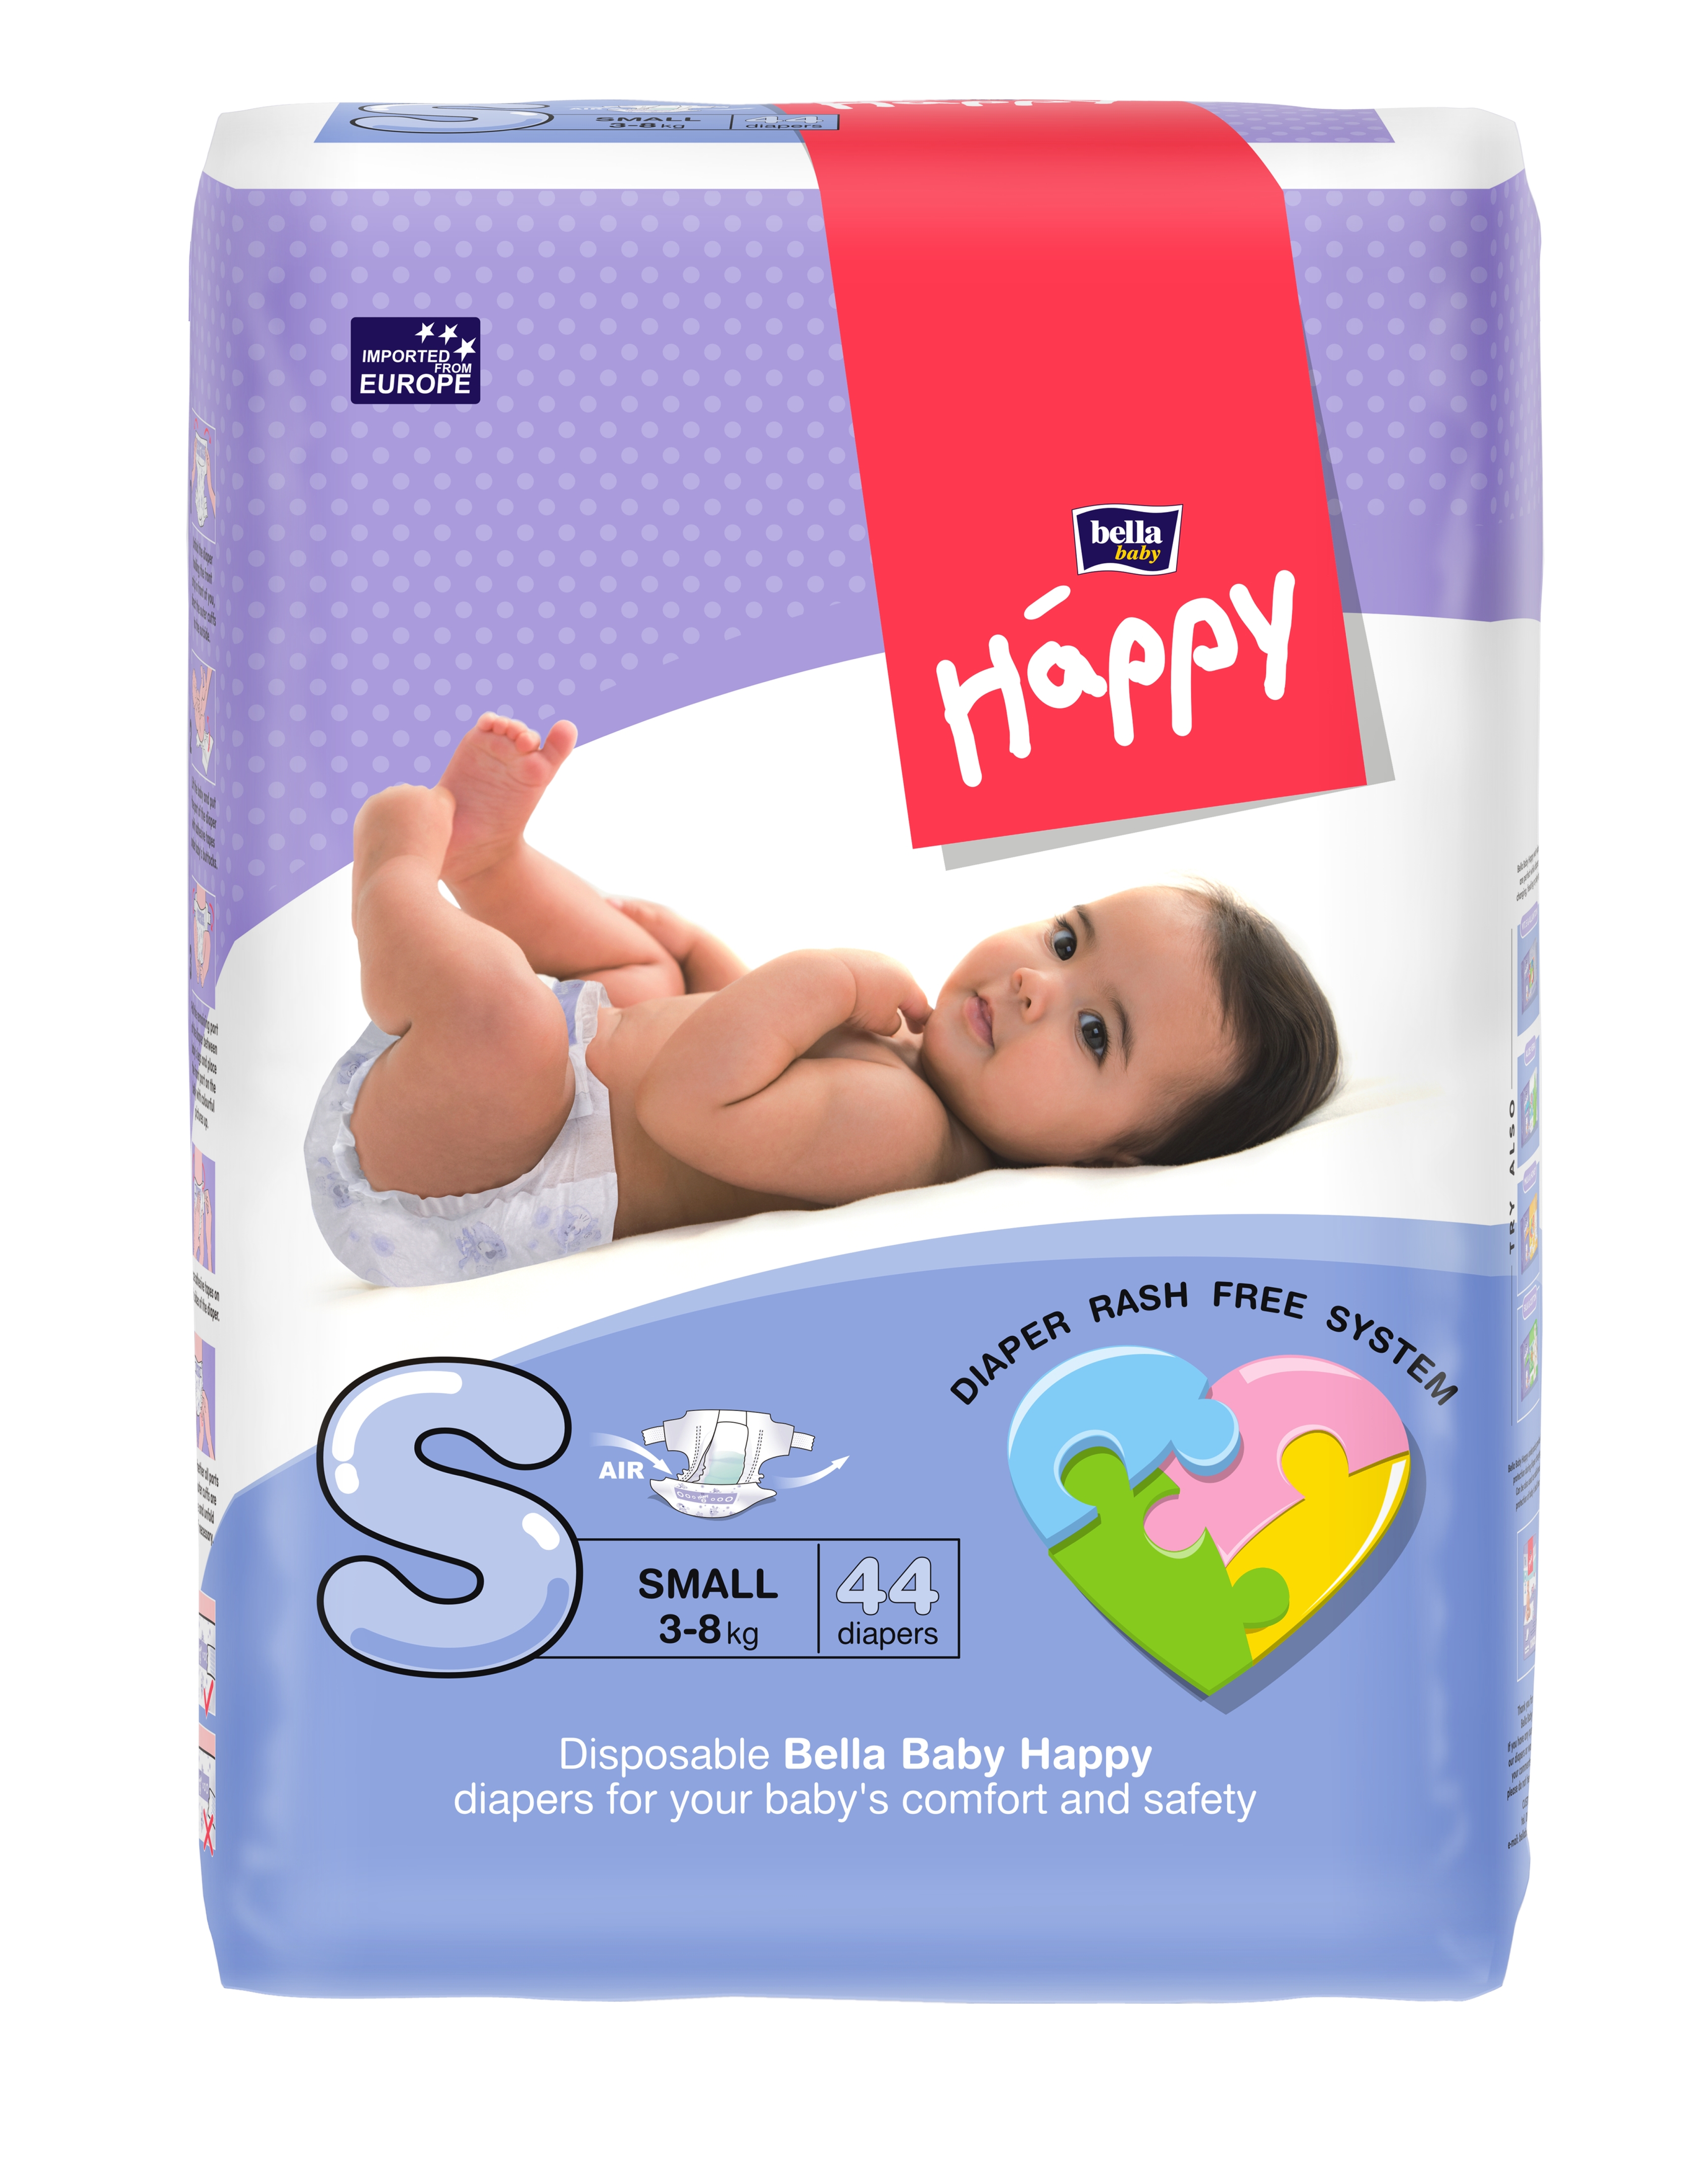 Buy BELLA BABY HAPPY DIAPERS SMALL 44 PCS at Best Price Online